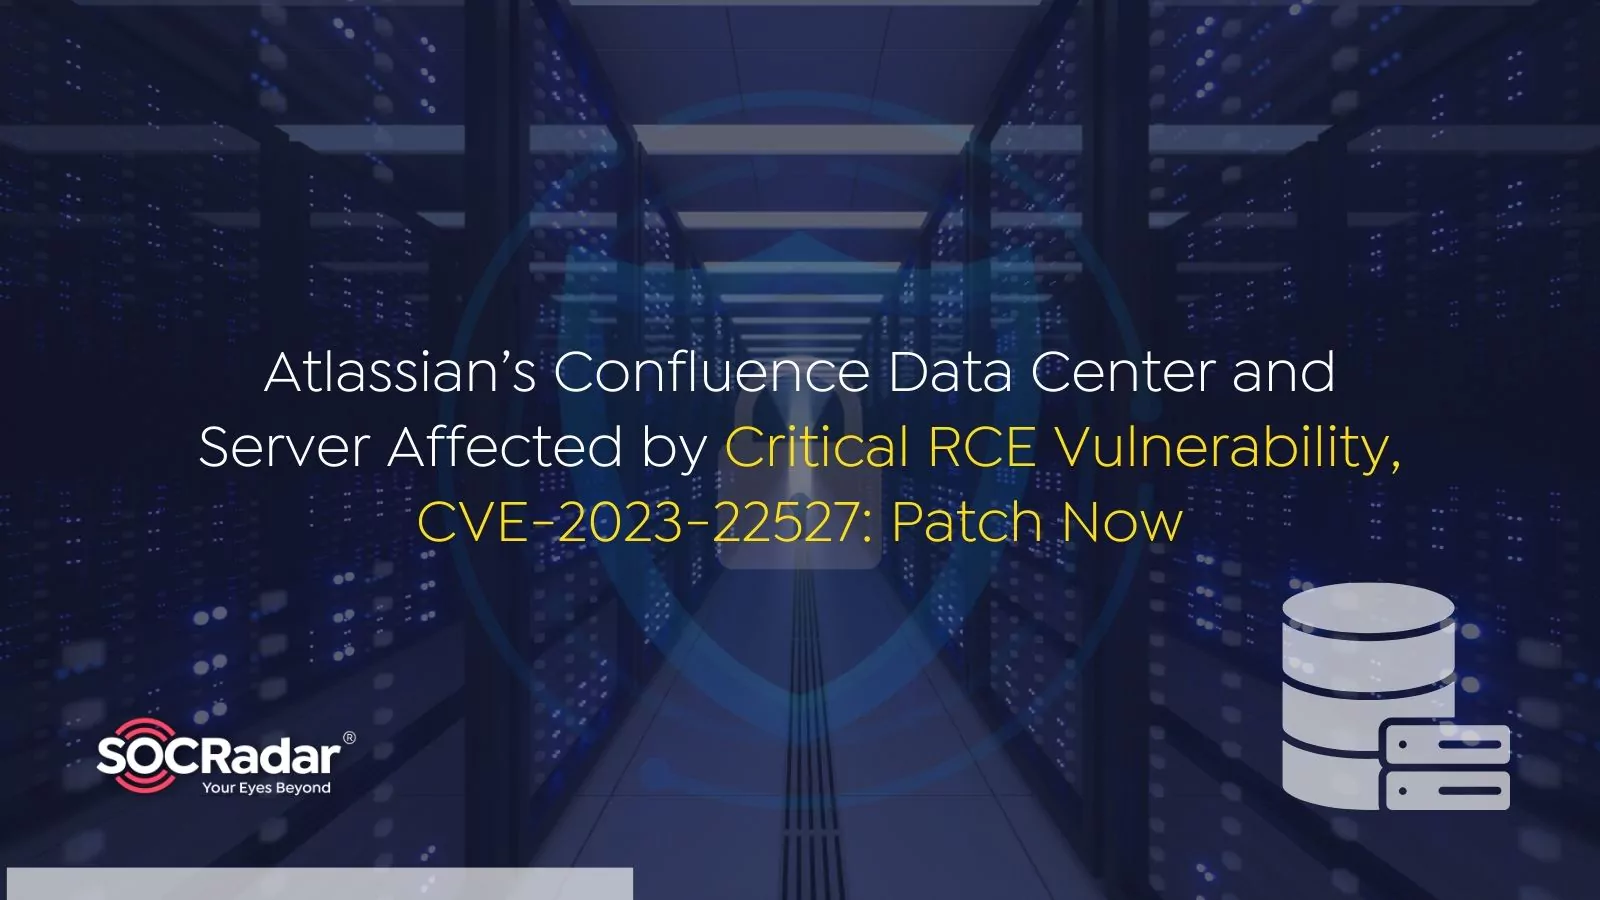 Atlassian’s Confluence Data Center and Server Affected by Critical RCE